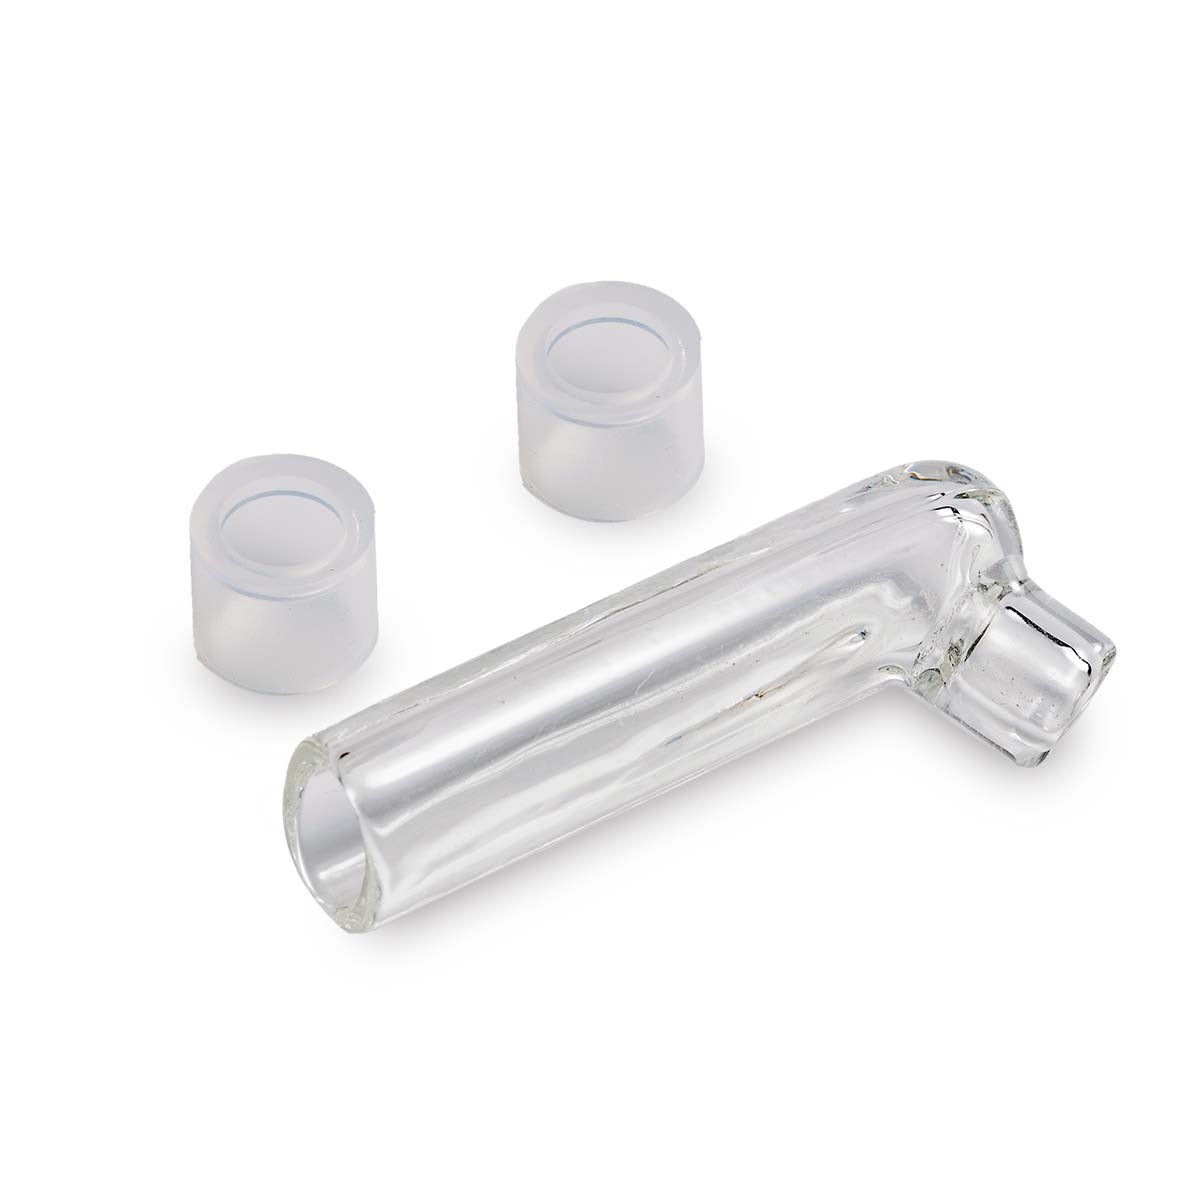 Crafty Mighty Boundless Cf Cfx Glass Mouthpiece Planet Of The Vapes